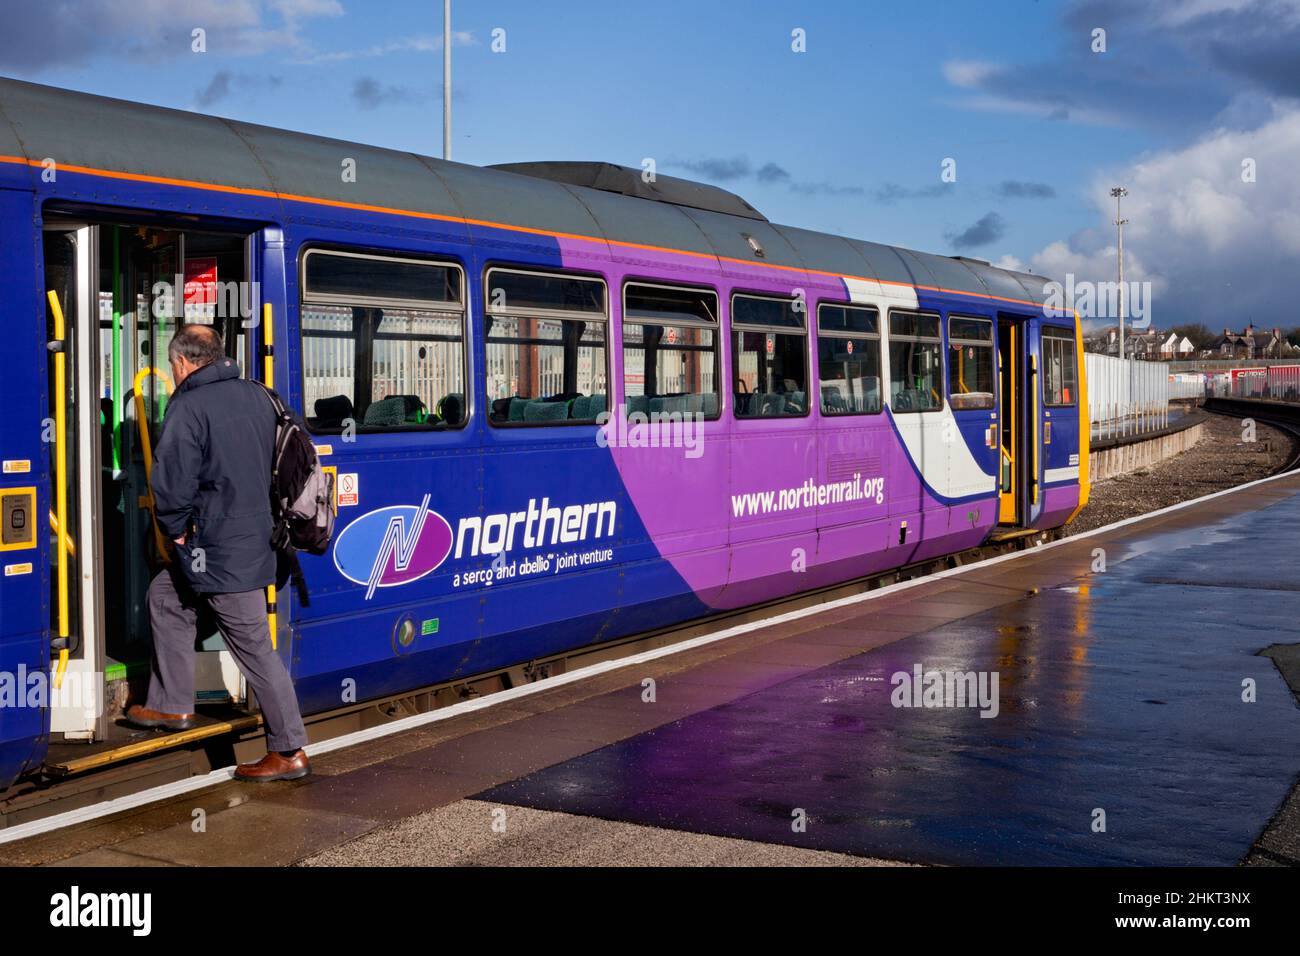 Northern Rail class 142 pacer train  Heysham Port railway station with the daily boat train to connect with the Isle of Man, passenger boarding Stock Photo